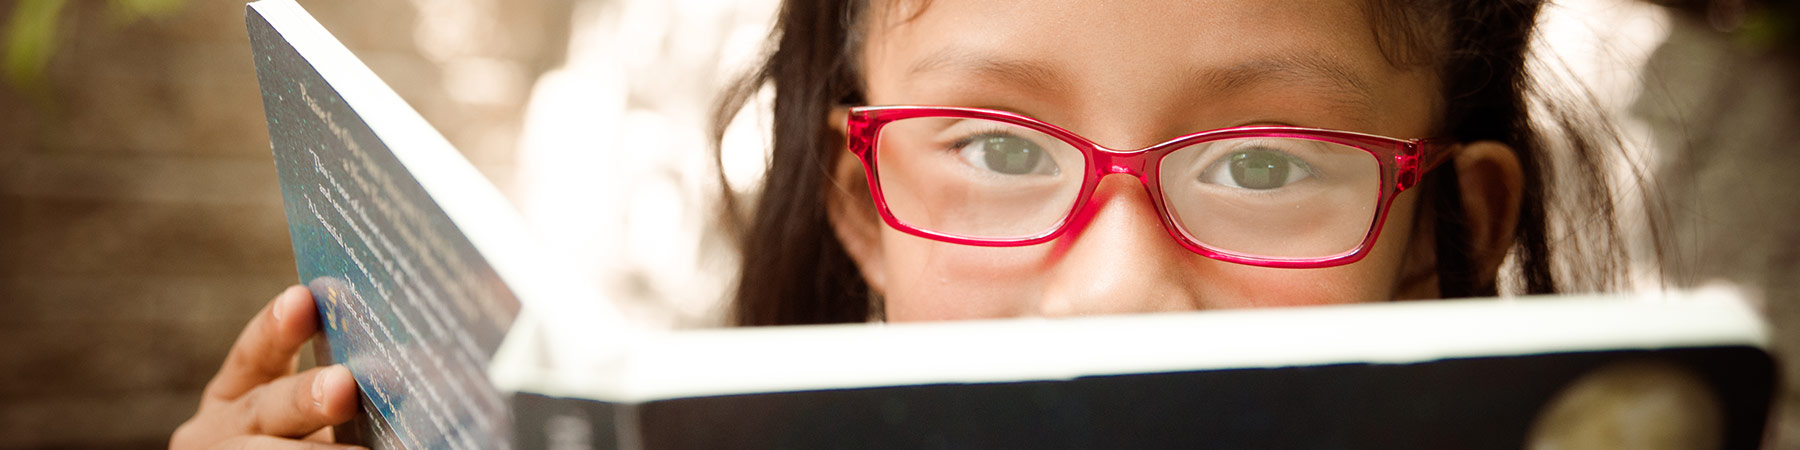 Photo of a child with red glasses peering over the top of a book